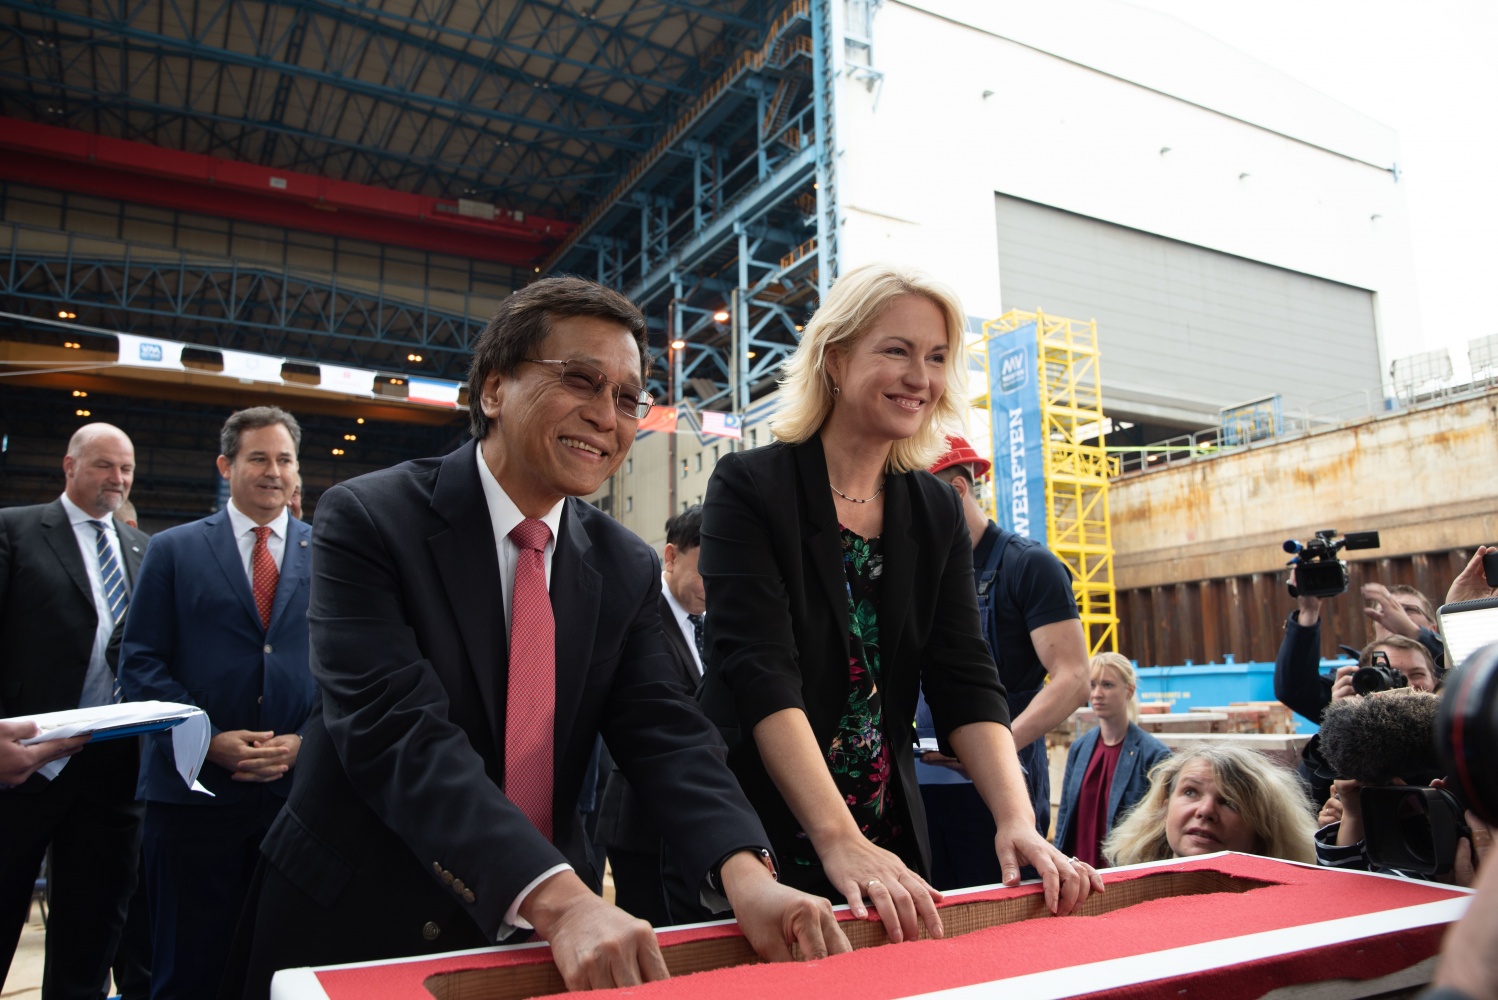 Prime Minister Manuela Schwesig (right) and Genting Hong Kong's Executive Chairman Tan Sri Lim Kok Thay (left) places lucky coins in the keel of Dream Cruises’ new Global Class ship.